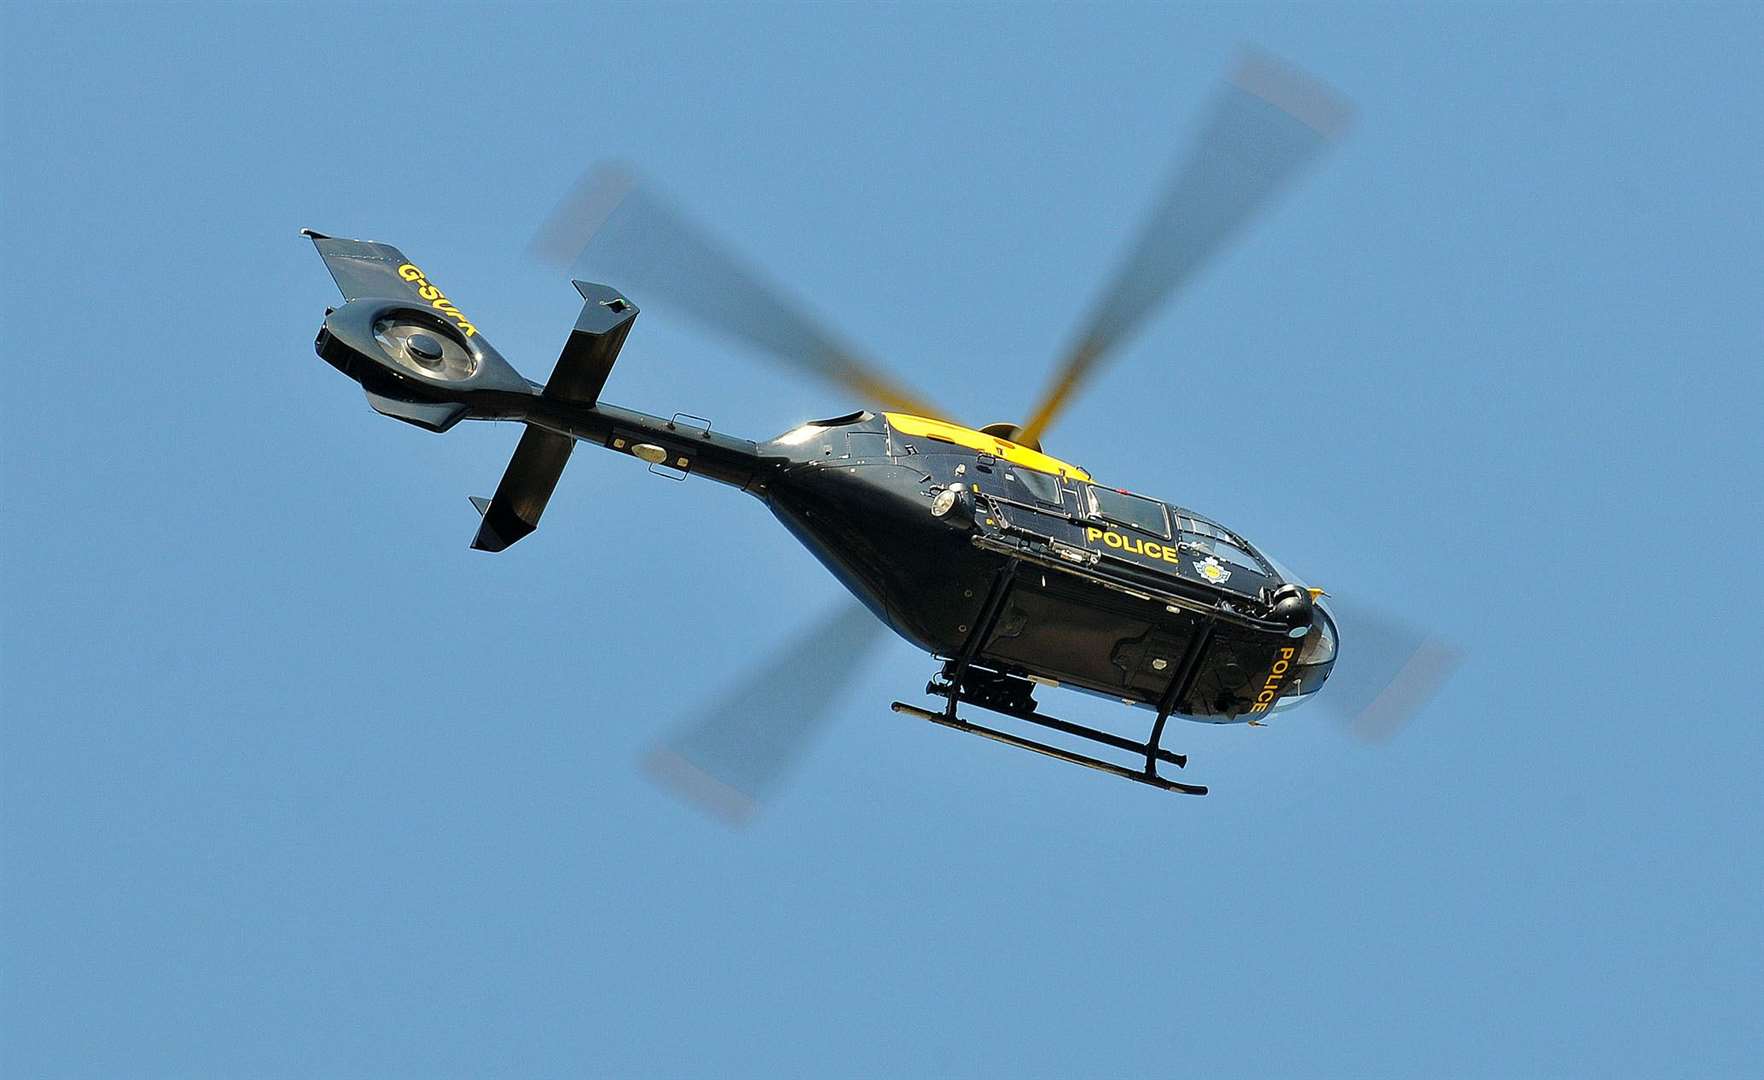 The national police helicopter was launched after the serious assault in Goudhurst. One teenager was arrested on suspicion of attempted murder